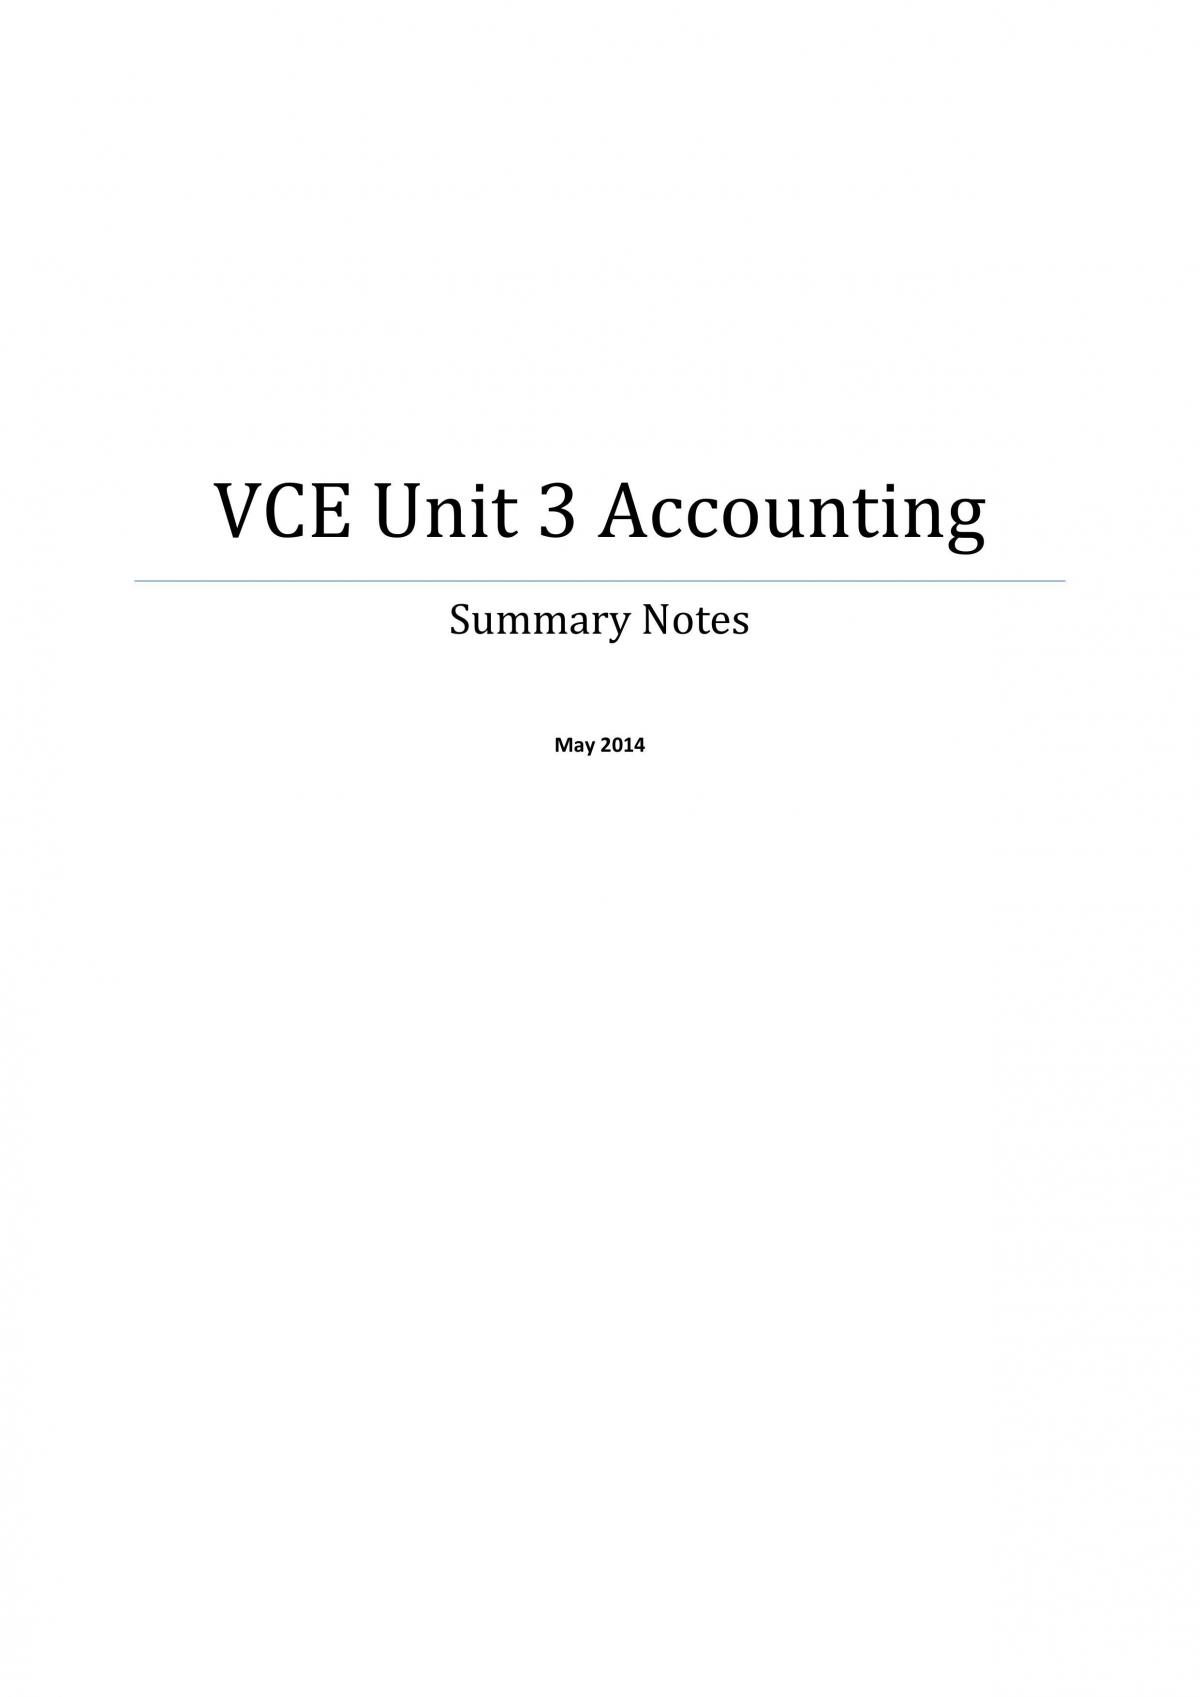 Full Unit 3 Accounting Notes - Page 1